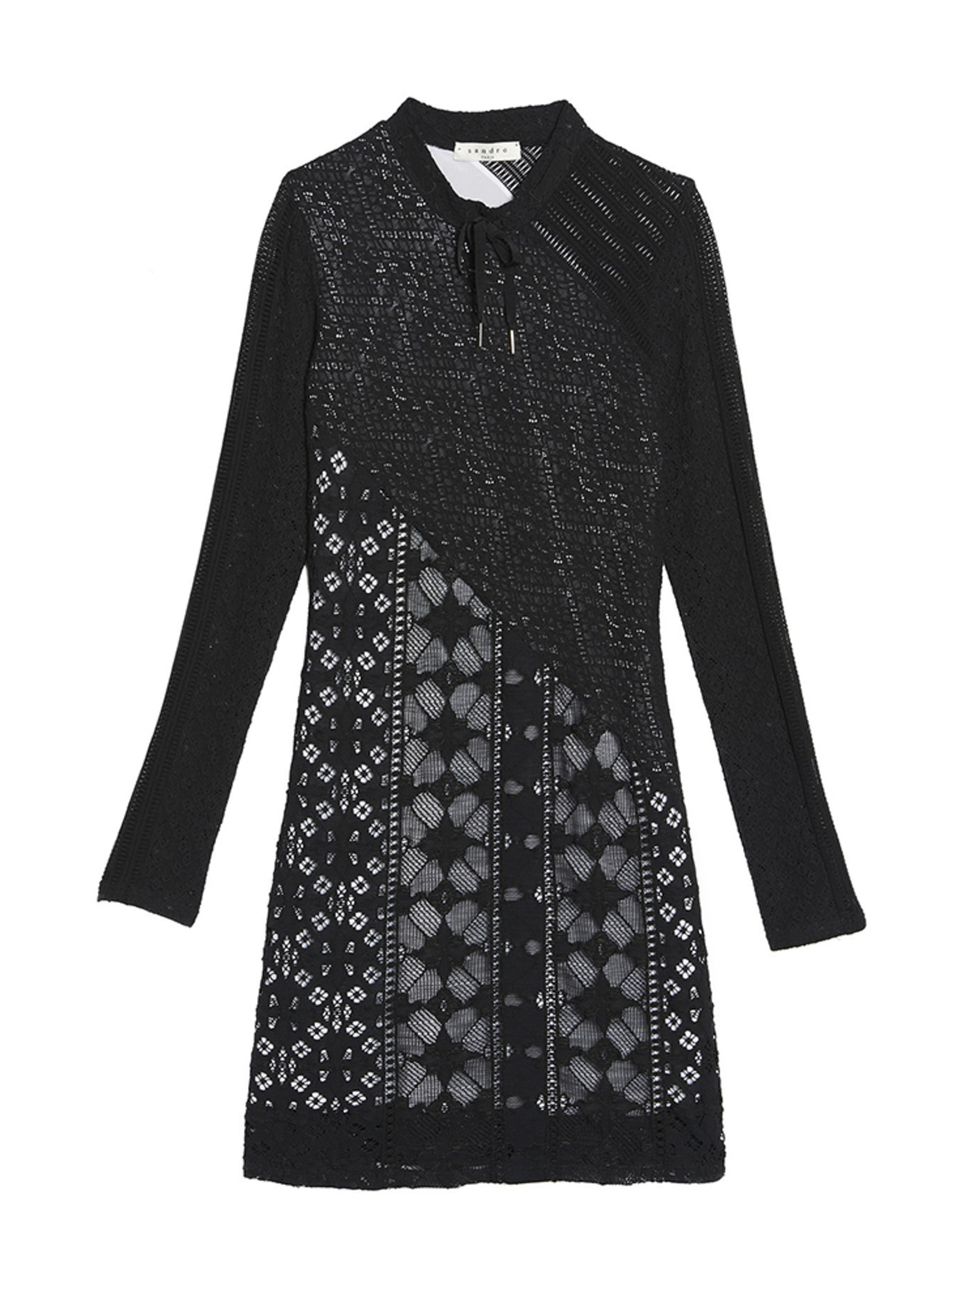 <p>This lace dress has a flared cut which is really flattering on most shapes. Combine with a brown suede coat and patent shoes for a textural 70s look.</p>

<p> </p>

<p><a href="http://uk.sandro-paris.com/en/woman/new-in/riviera-dress/R4362H.html?dwvar_